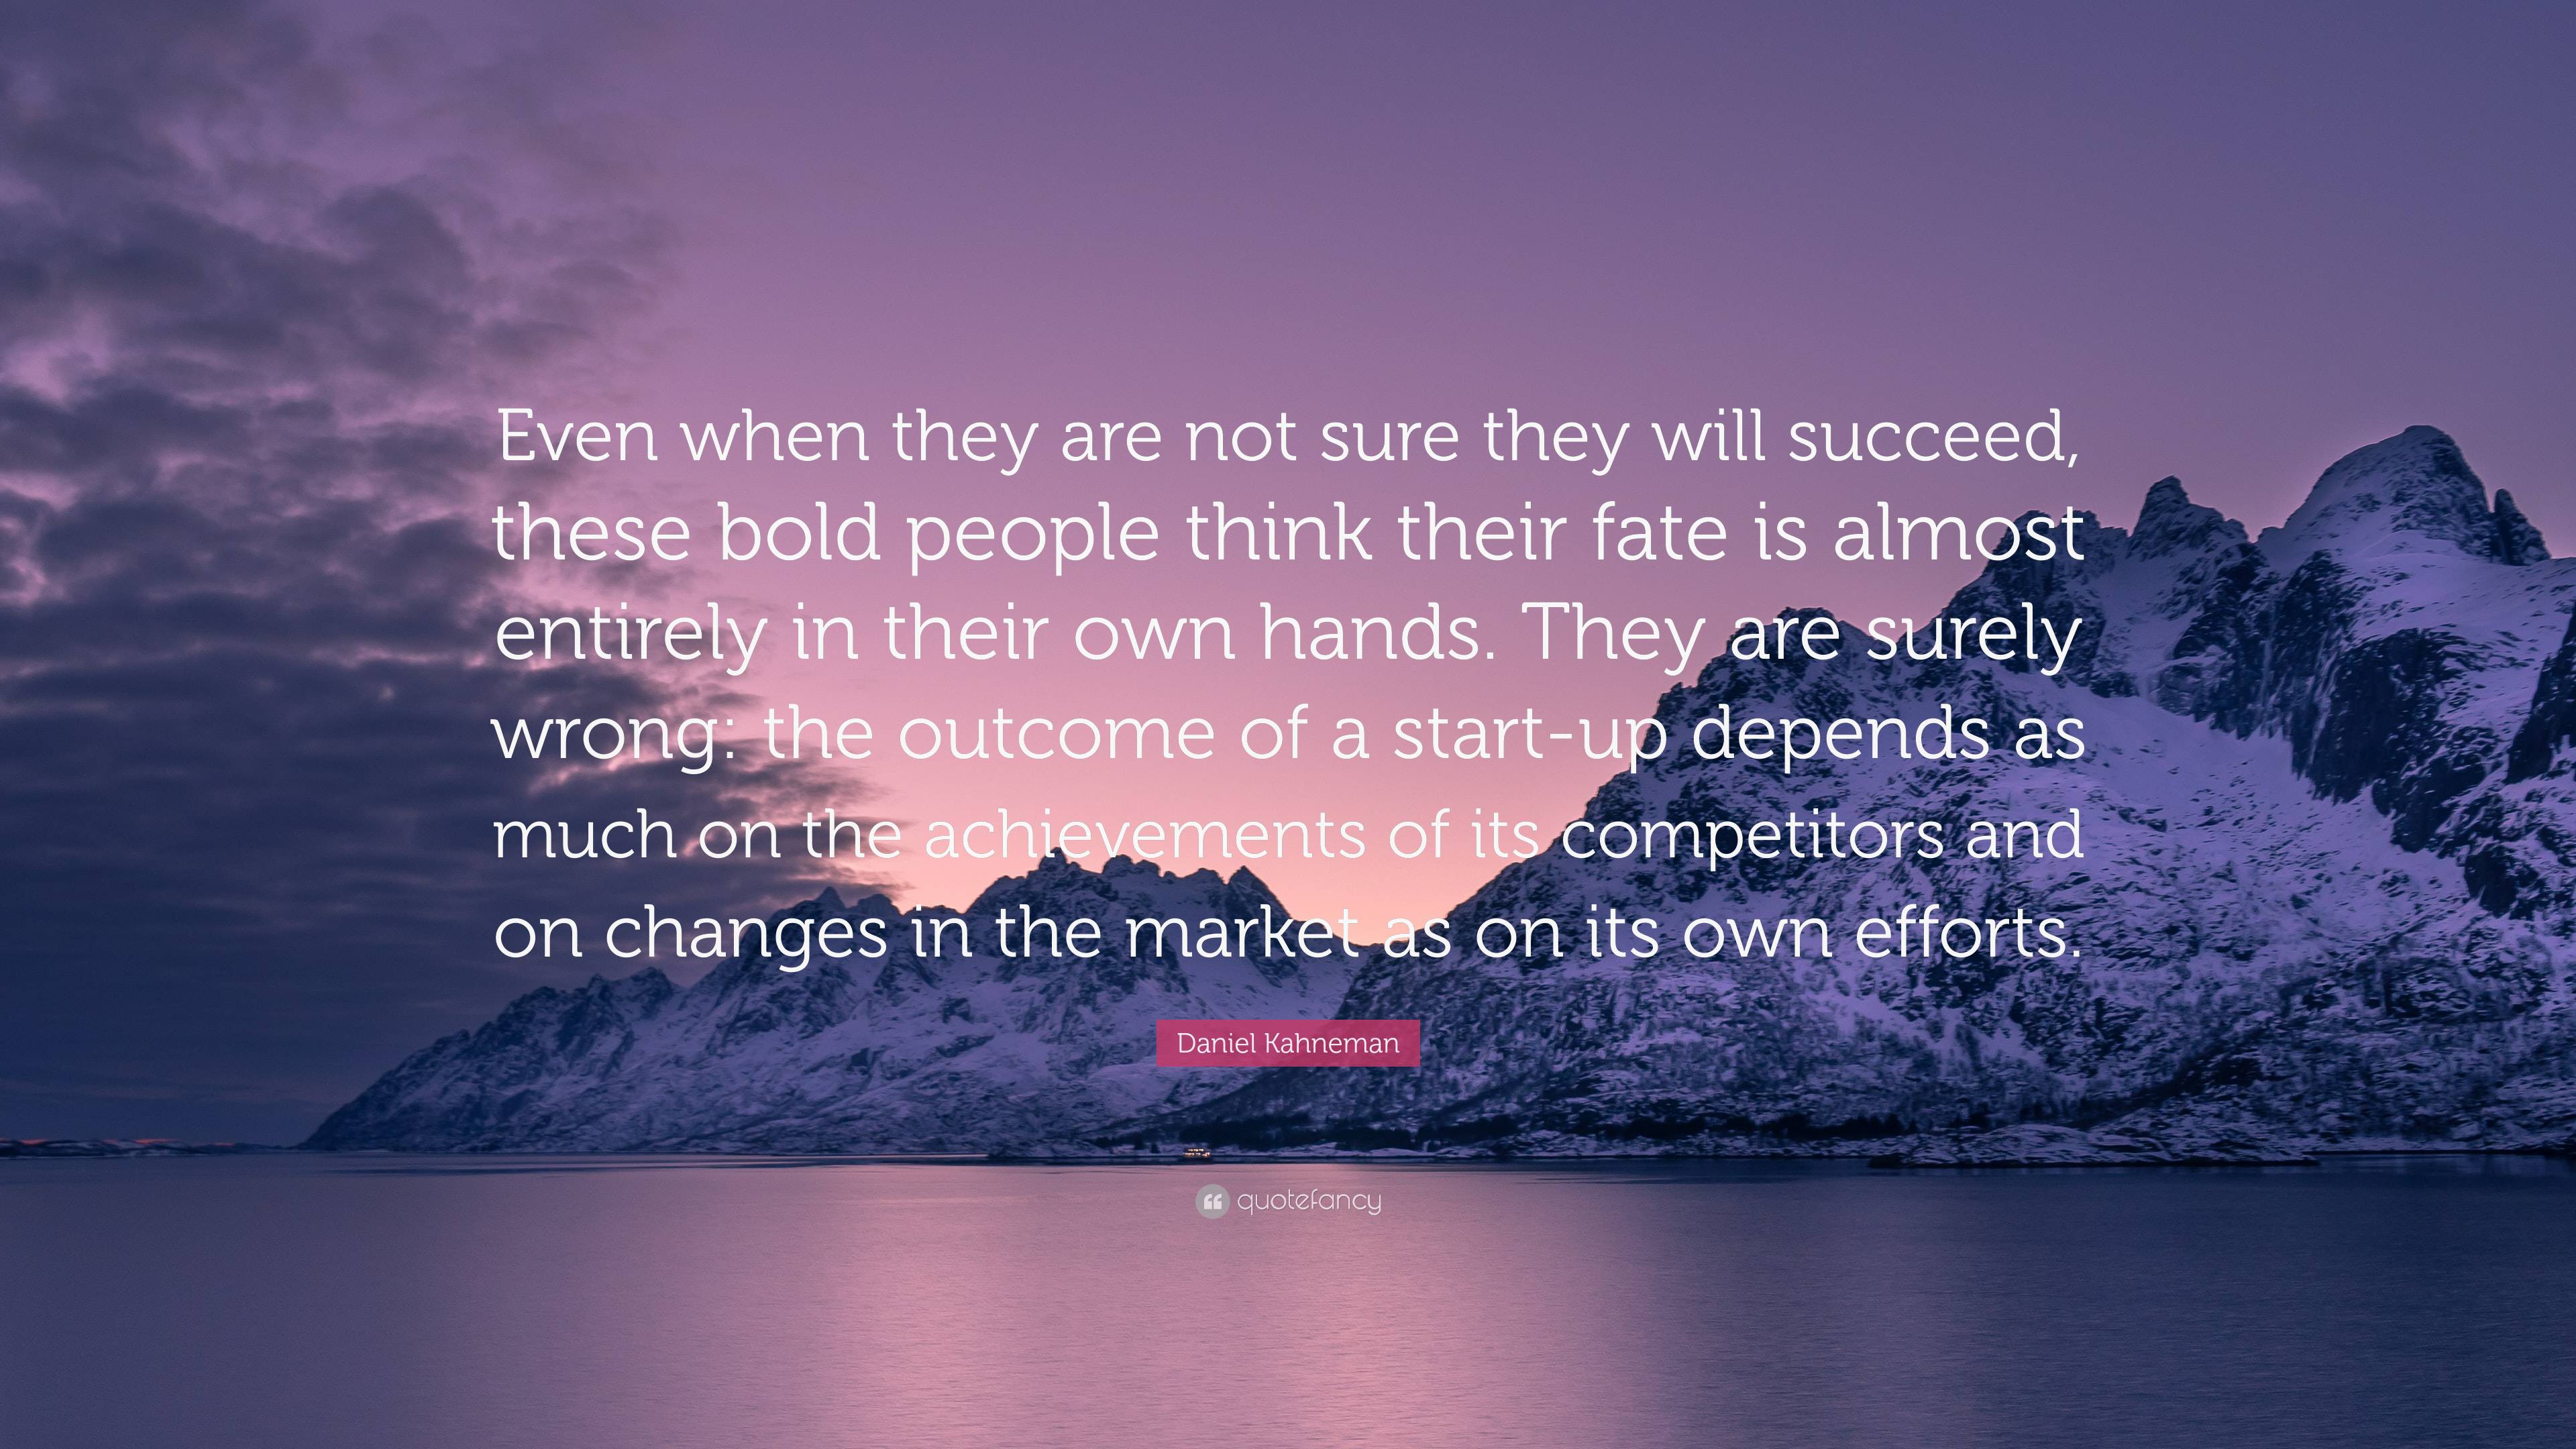 Daniel Kahneman Quote: “Even when they are not sure they will succeed ...